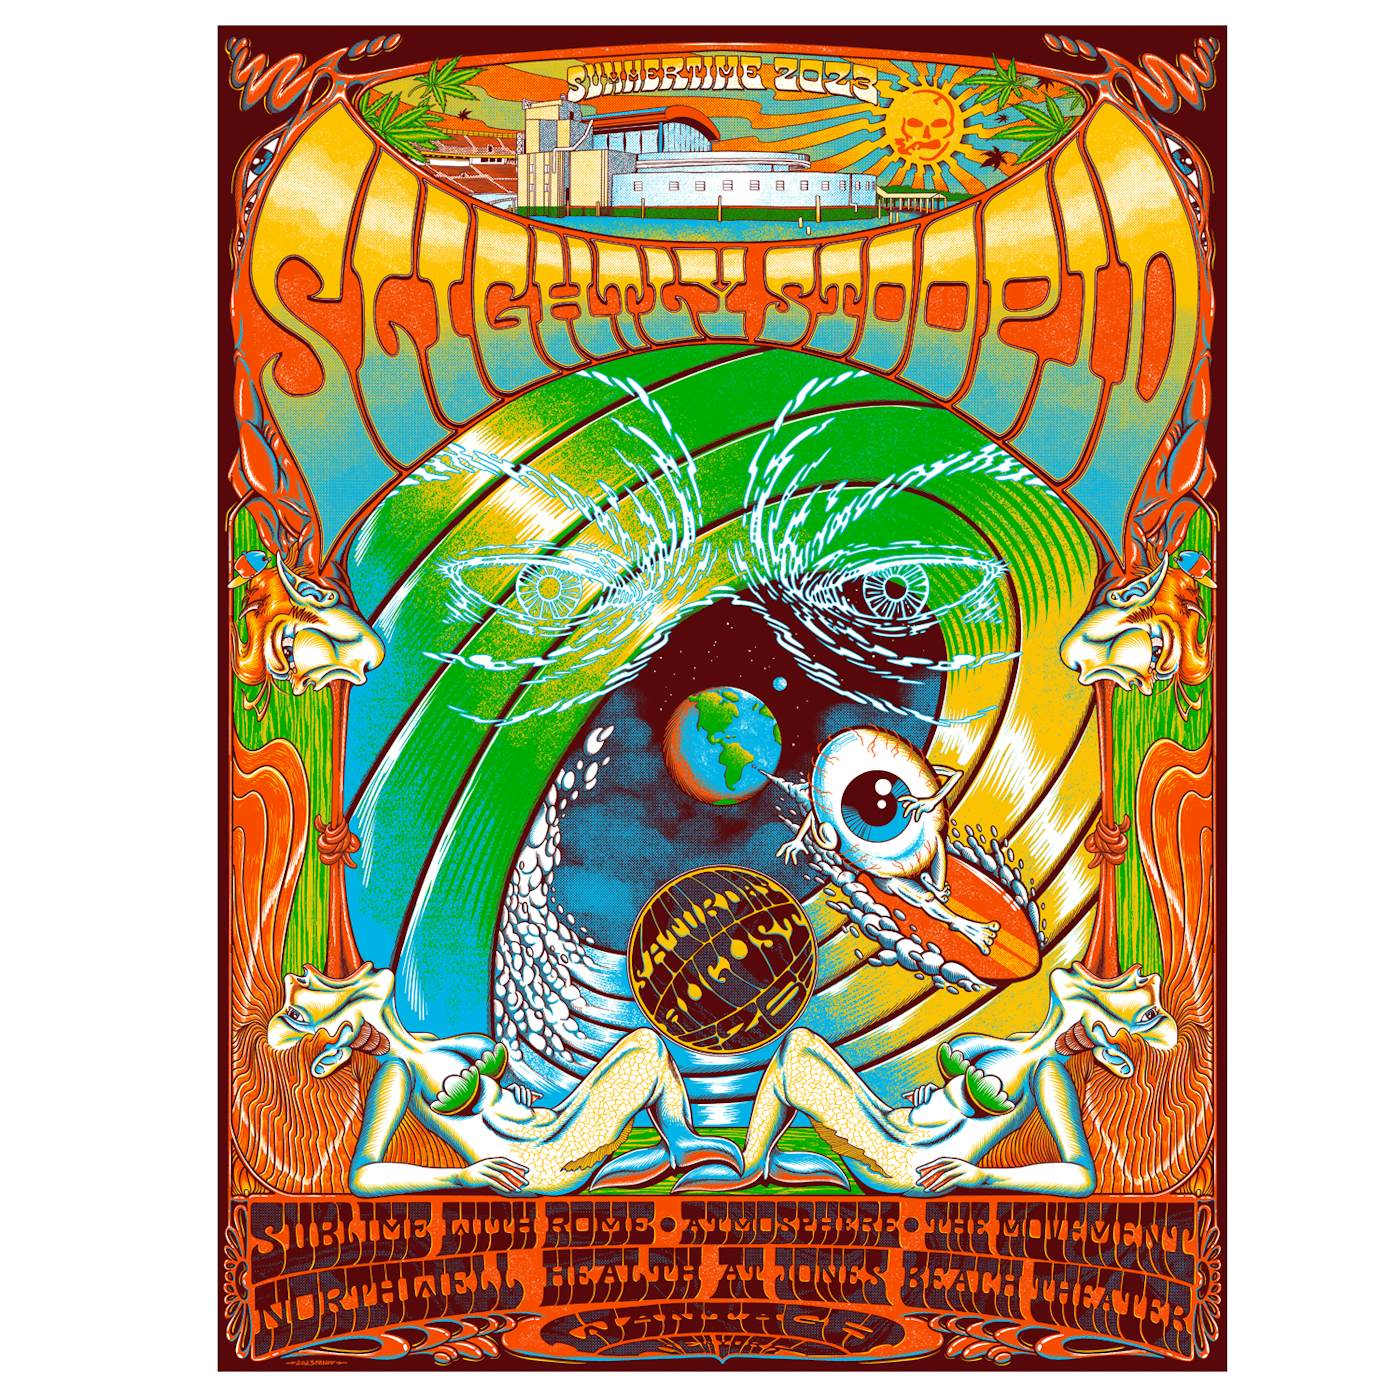 Slightly Stoopid 8/26/23 Wantagh, NY Show Poster by Fandy Darisman